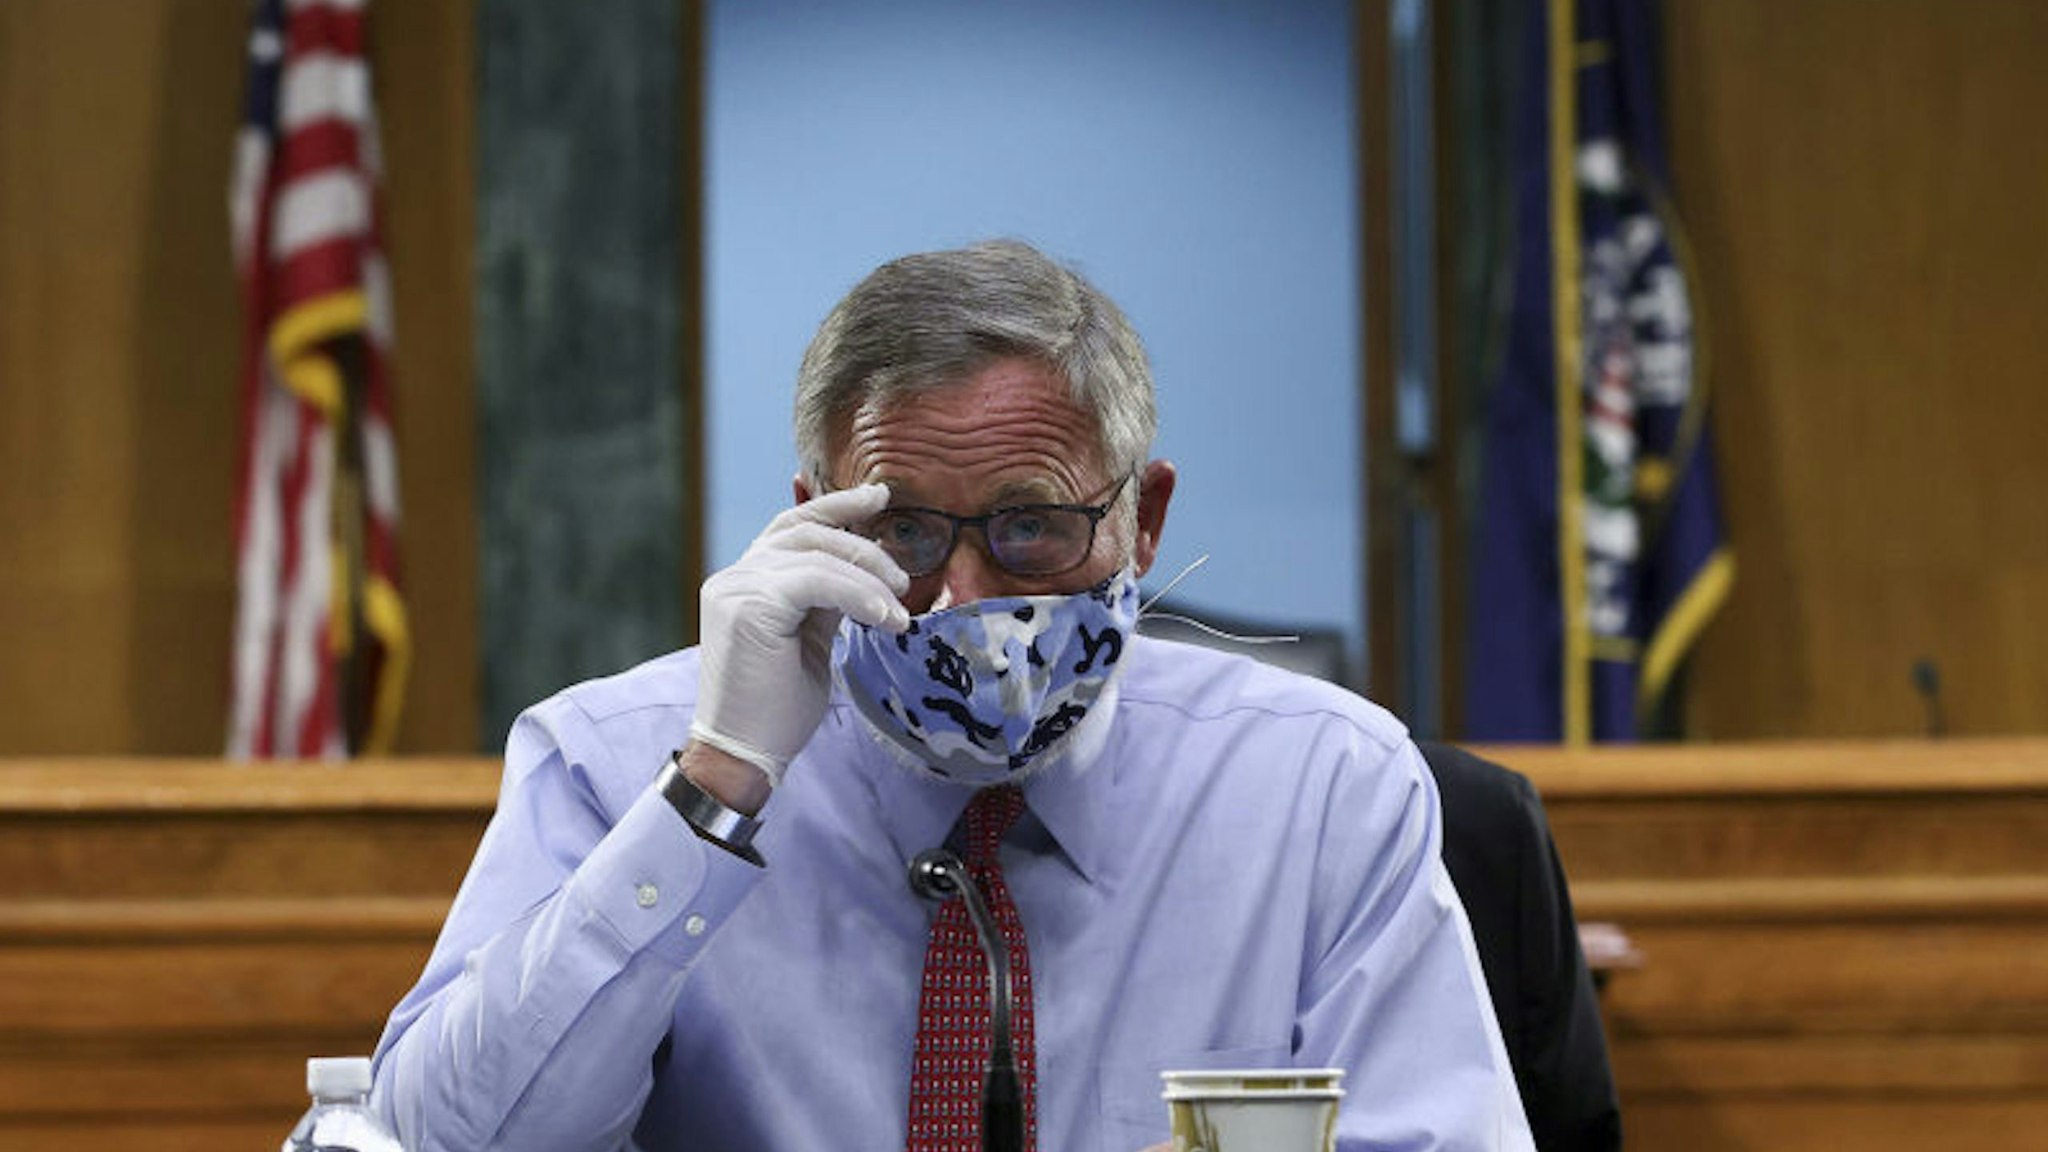 Senator Richard Burr, a Republican from North Carolina, wears a protective mask and glove while arriving to a Senate Health, Education, Labor, and Pensions Committee hearing in Washington, D.C., U.S., on Tuesday, May 12, 2020. Amid the sharpest downturn in U.S. history, President Donald Trump has been pressing to begin relaxing the lockdowns that have shuttered businesses despite warnings from some public health experts that doing so too quickly risks a further spread of the virus.